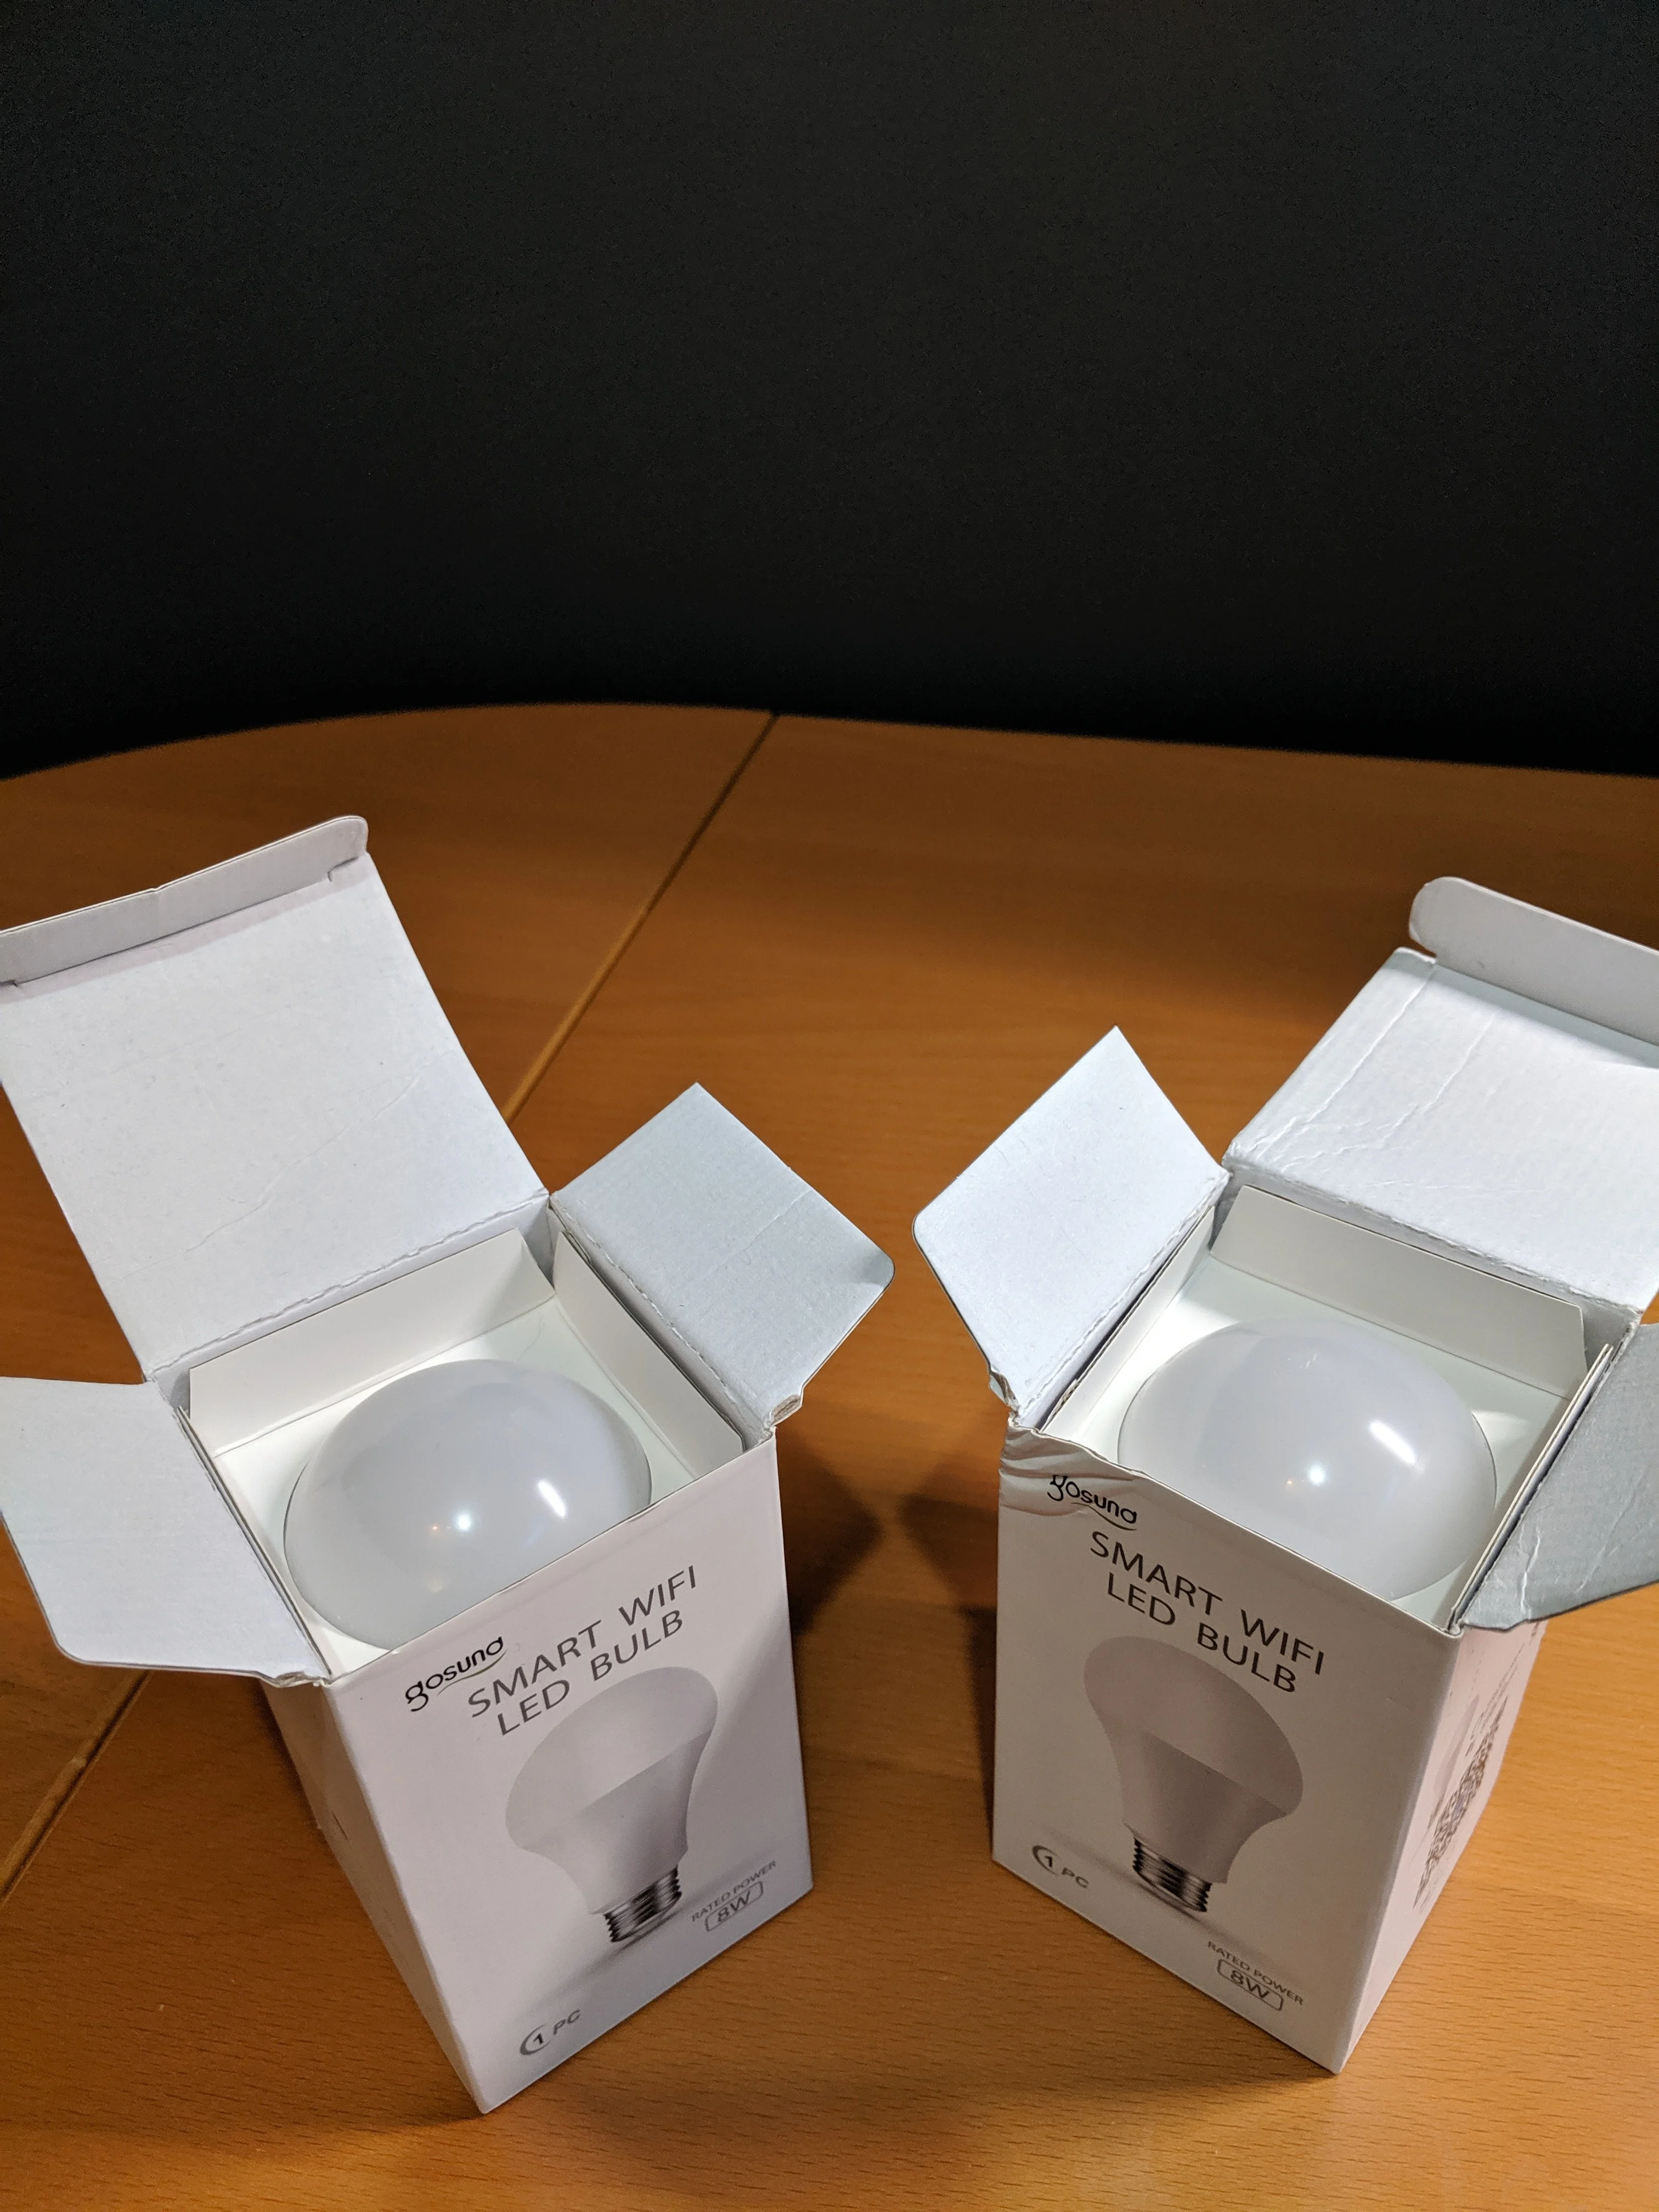 A pair of Gosund Smart Wifi LED Bulb Box Opened and arranged on table